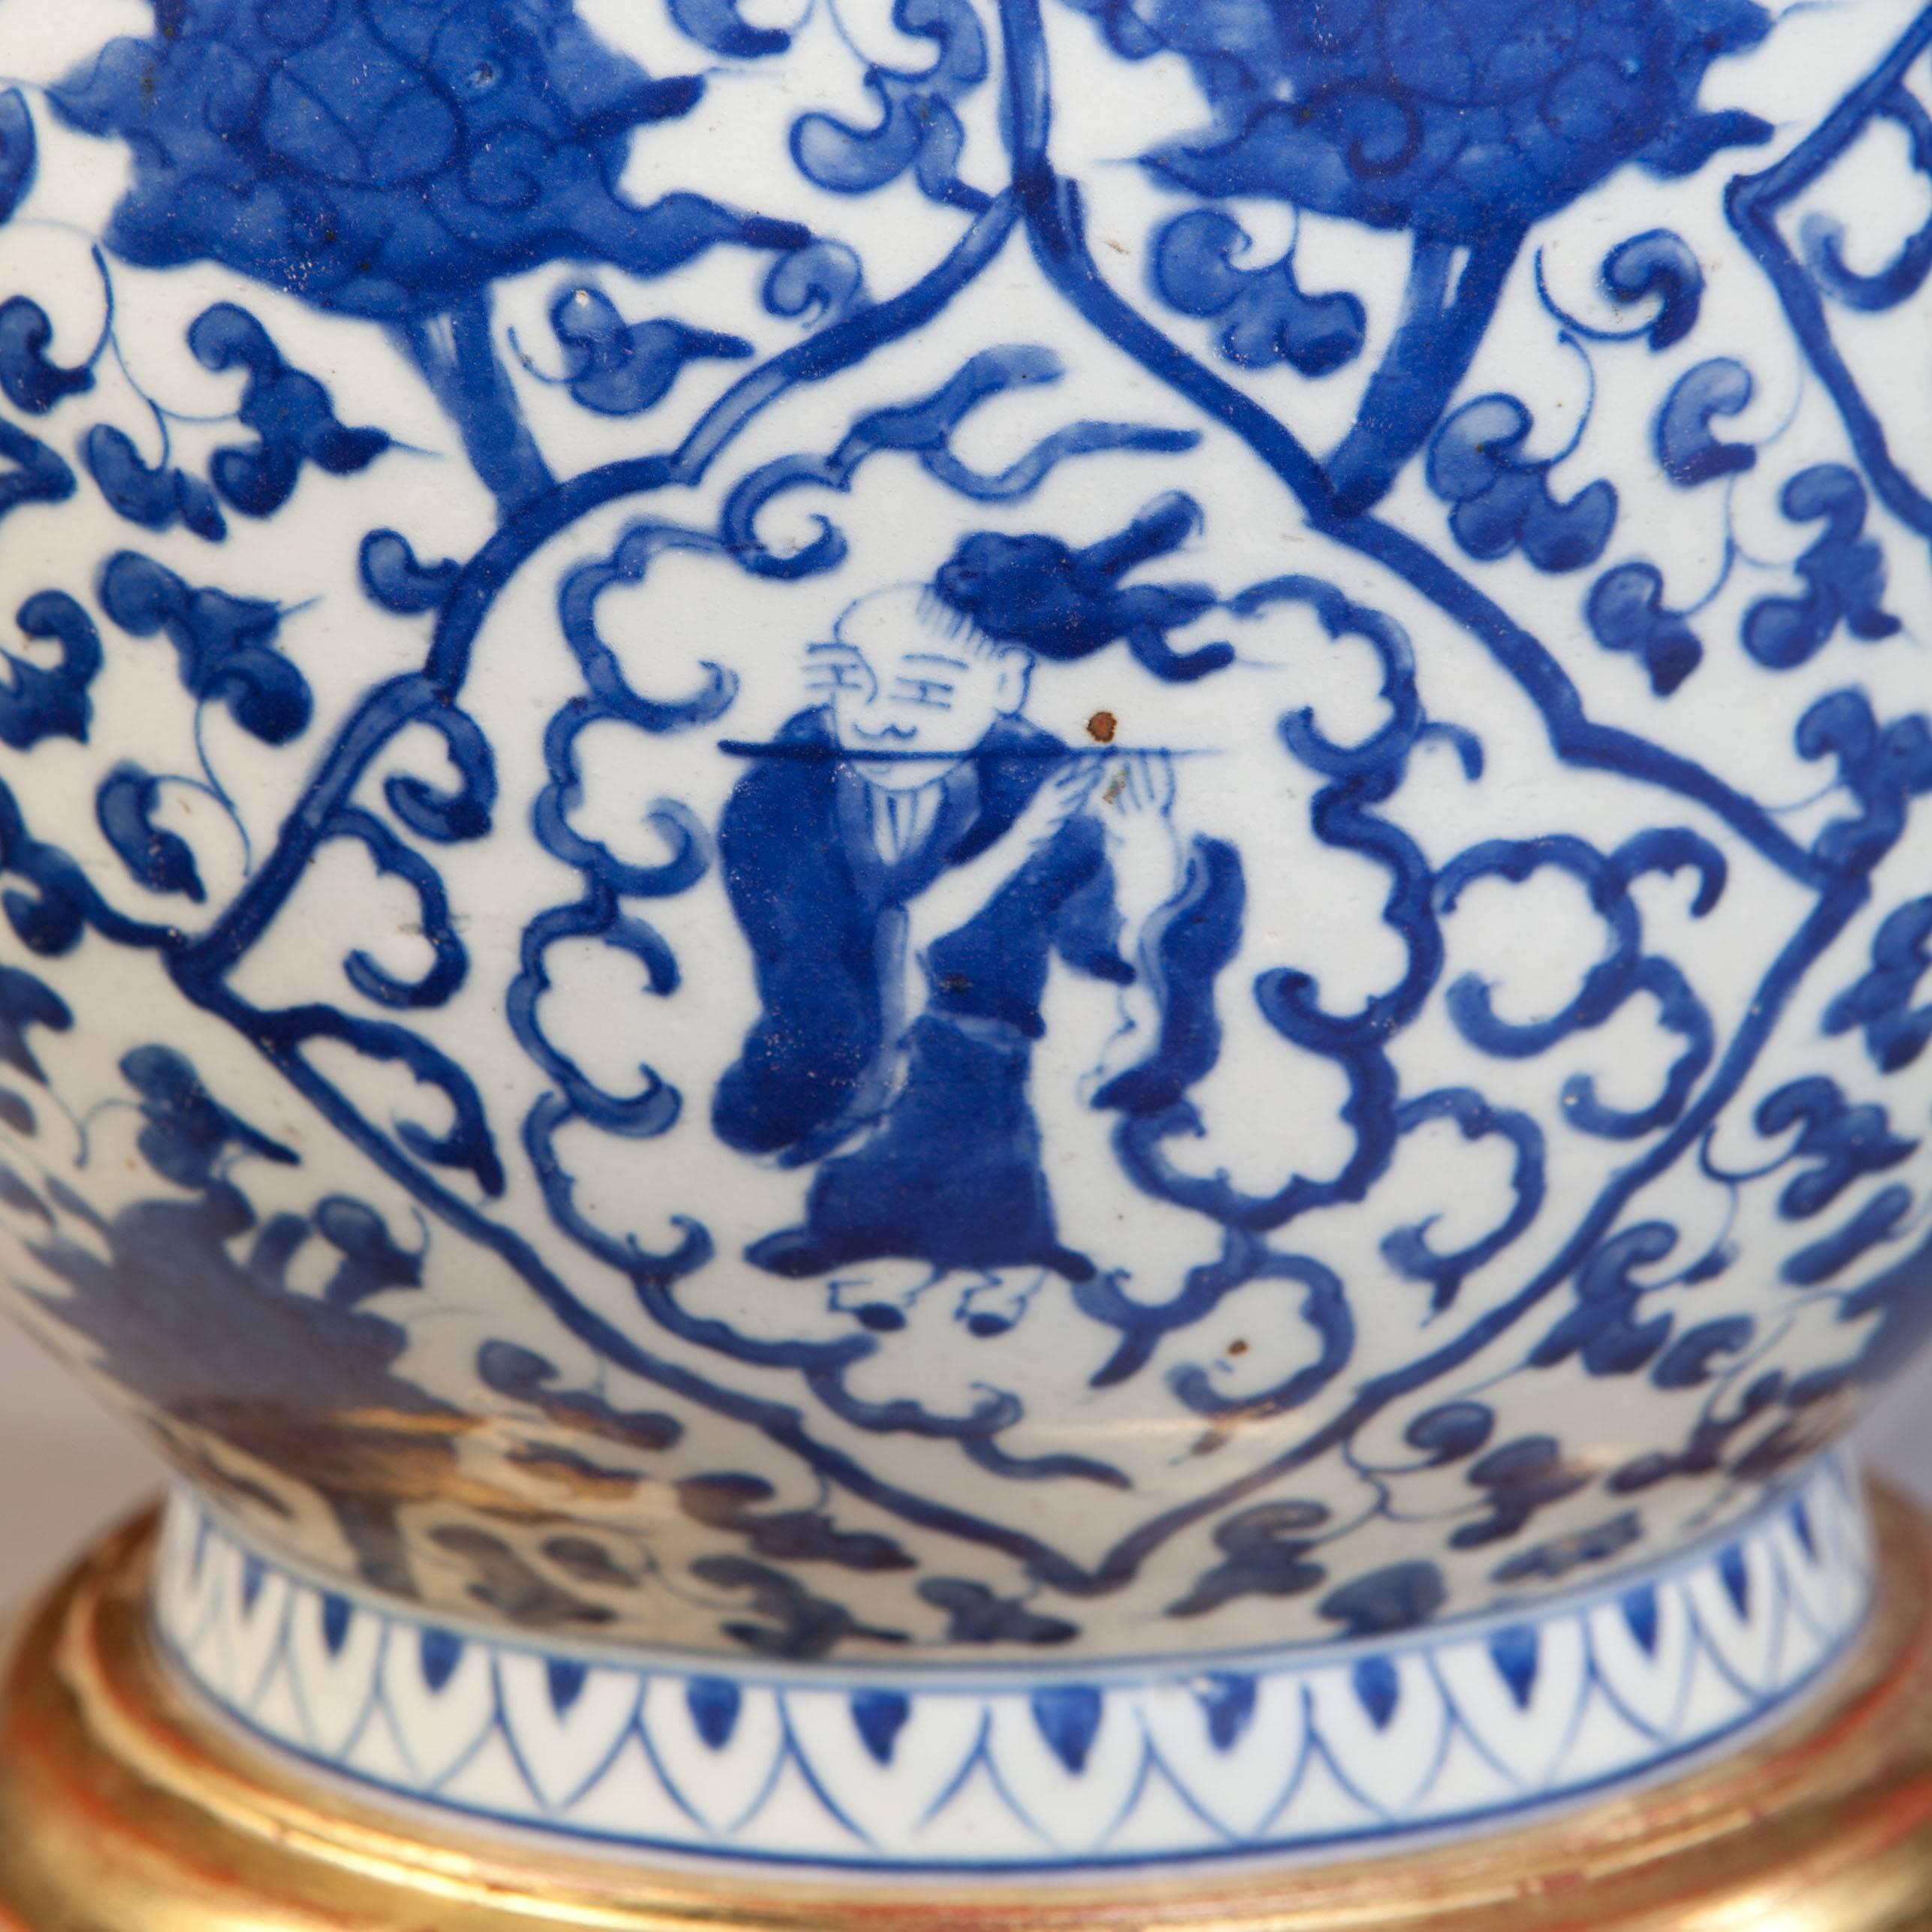 A wonderfully decorative 19th-century Chinese blue and white porcelain vase, made for the European export market, the form known as 'Hu' decorated with figures of philosophers. 

The decoration is rich and varied, without being overly fussy, the